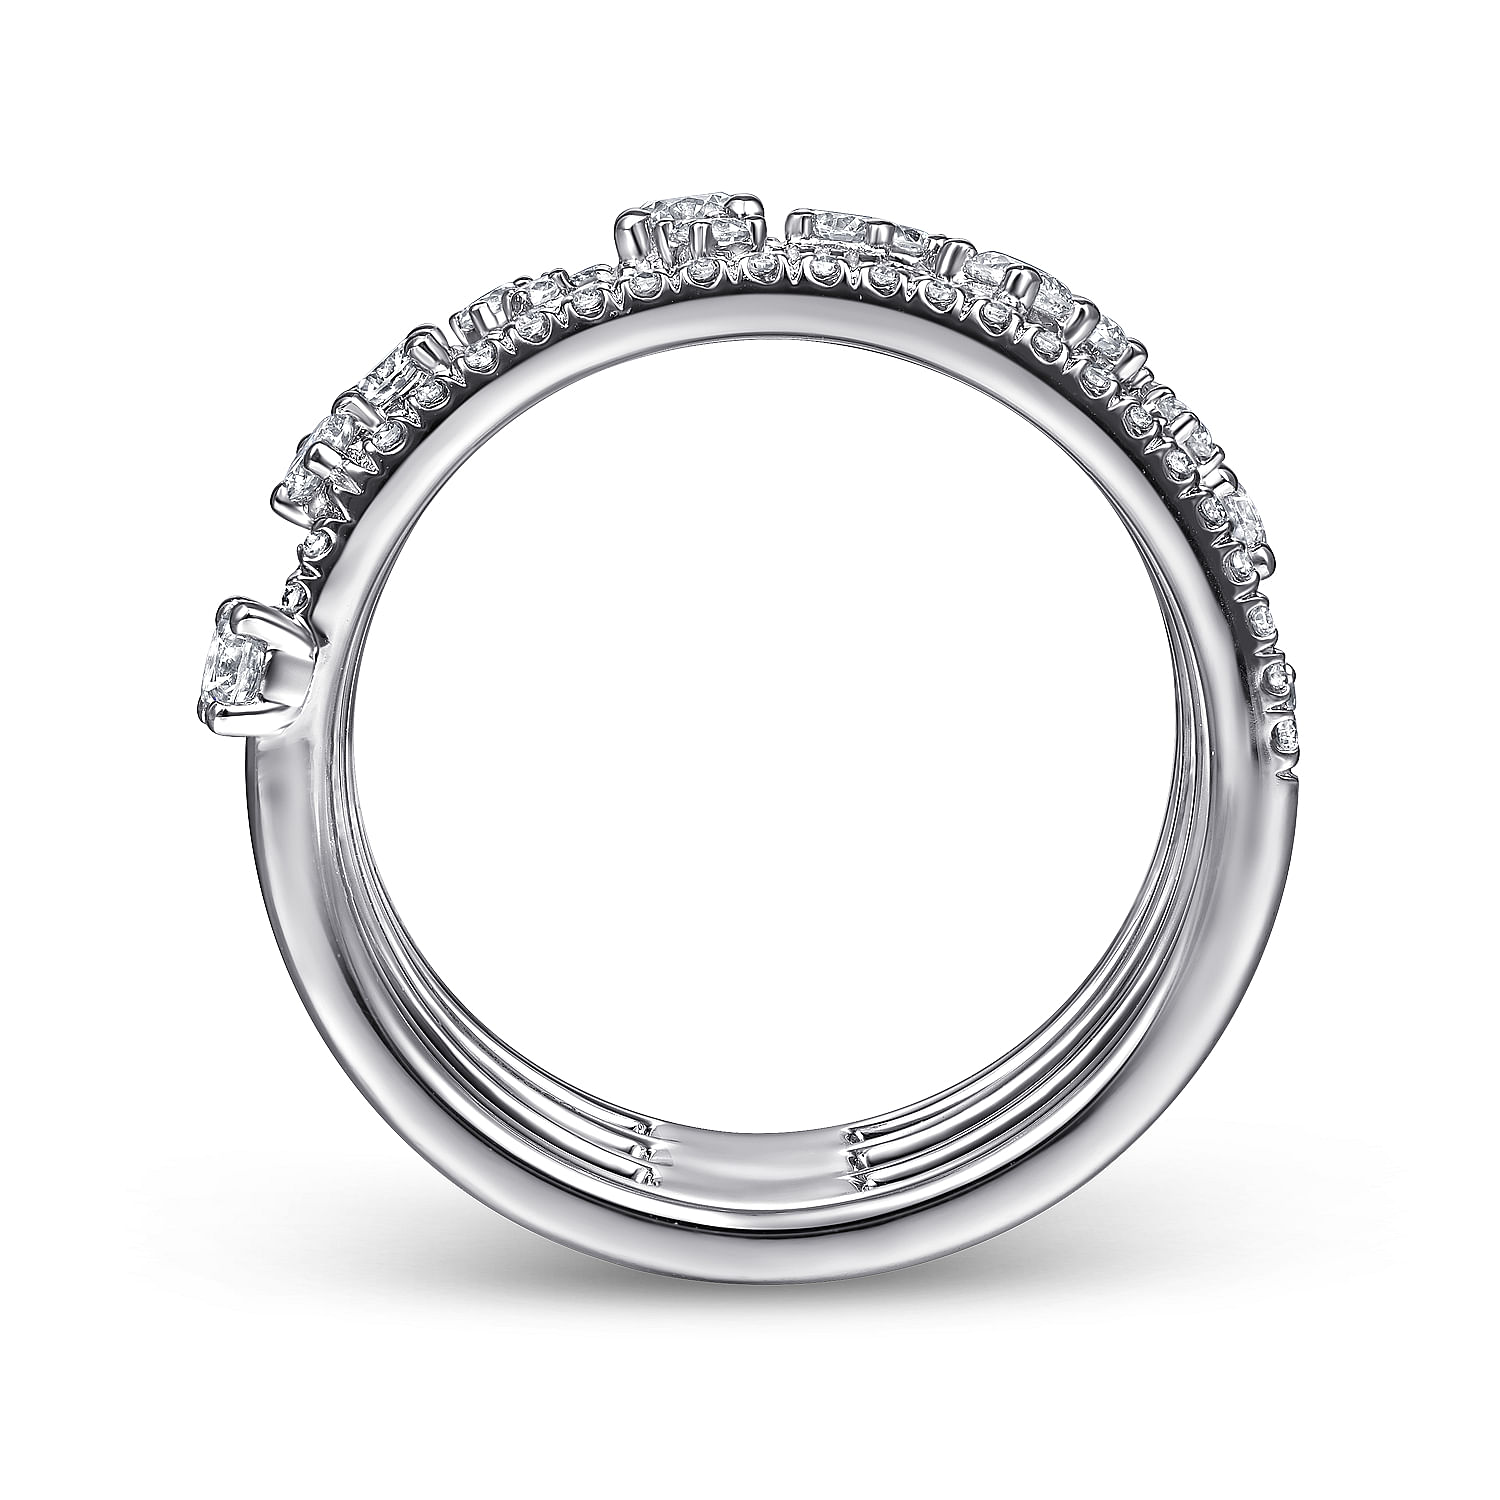 14K White Gold Five Row Pavé Ring with Cluster Diamond Accent